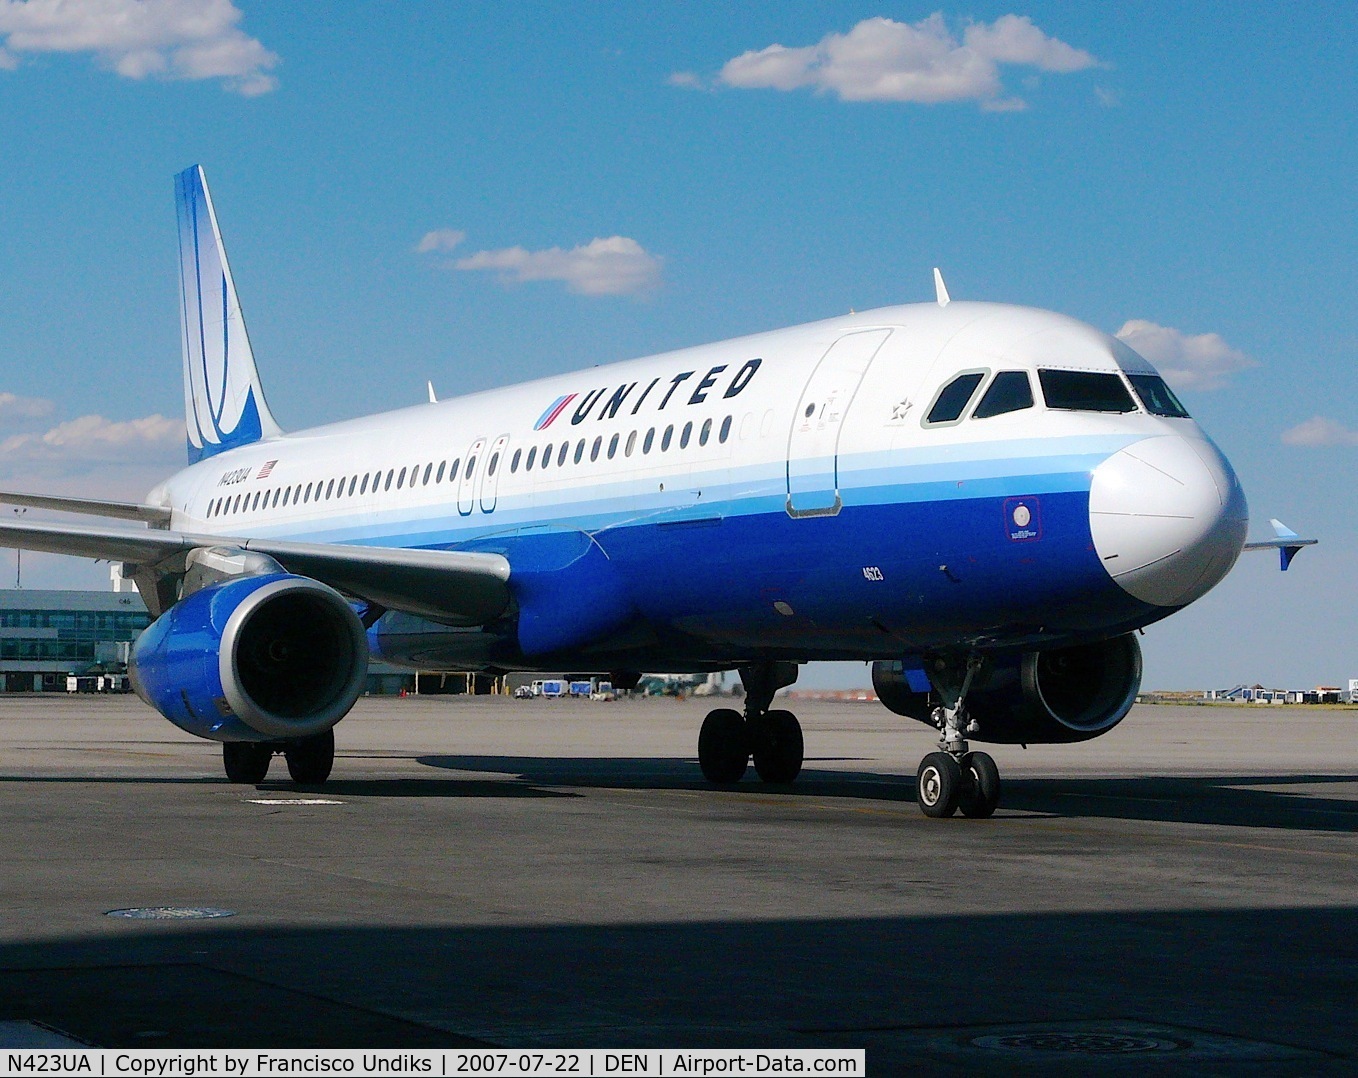 N423UA, 1995 Airbus A320-232 C/N 504, United Airlines A320 for B39.